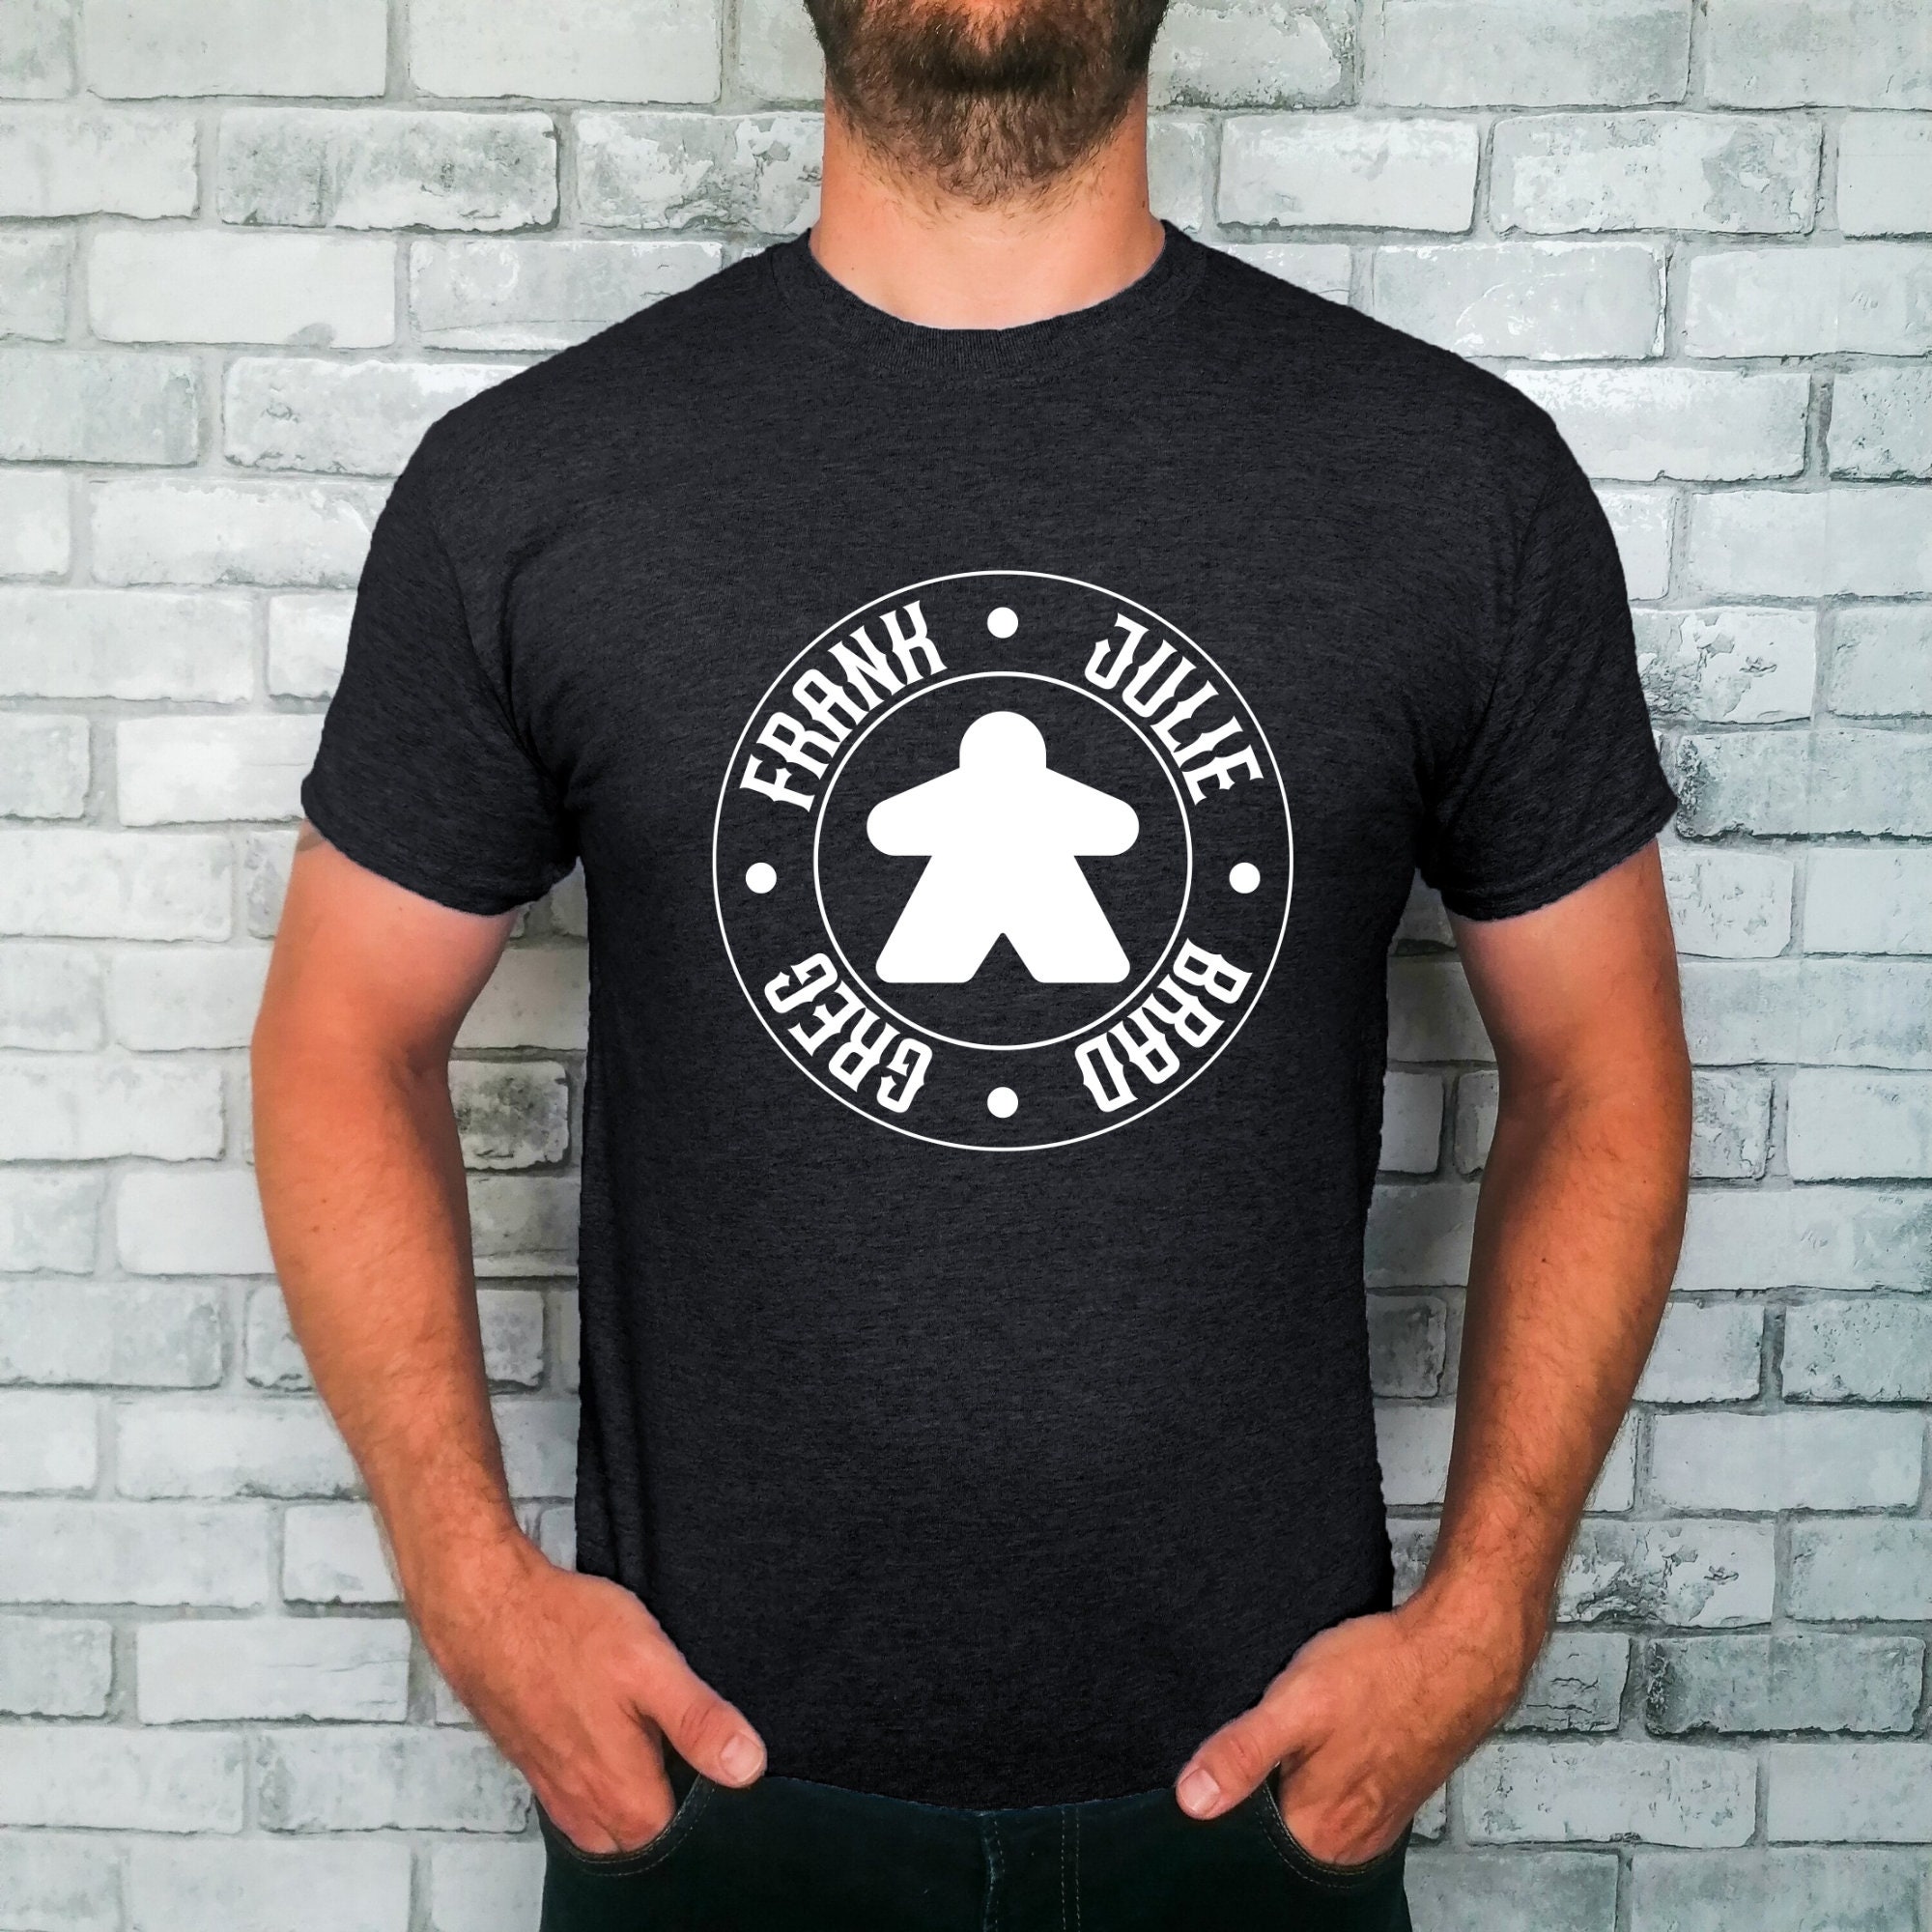 Meeple League Gaming Board Game T-Shirt - Meeple Shirts